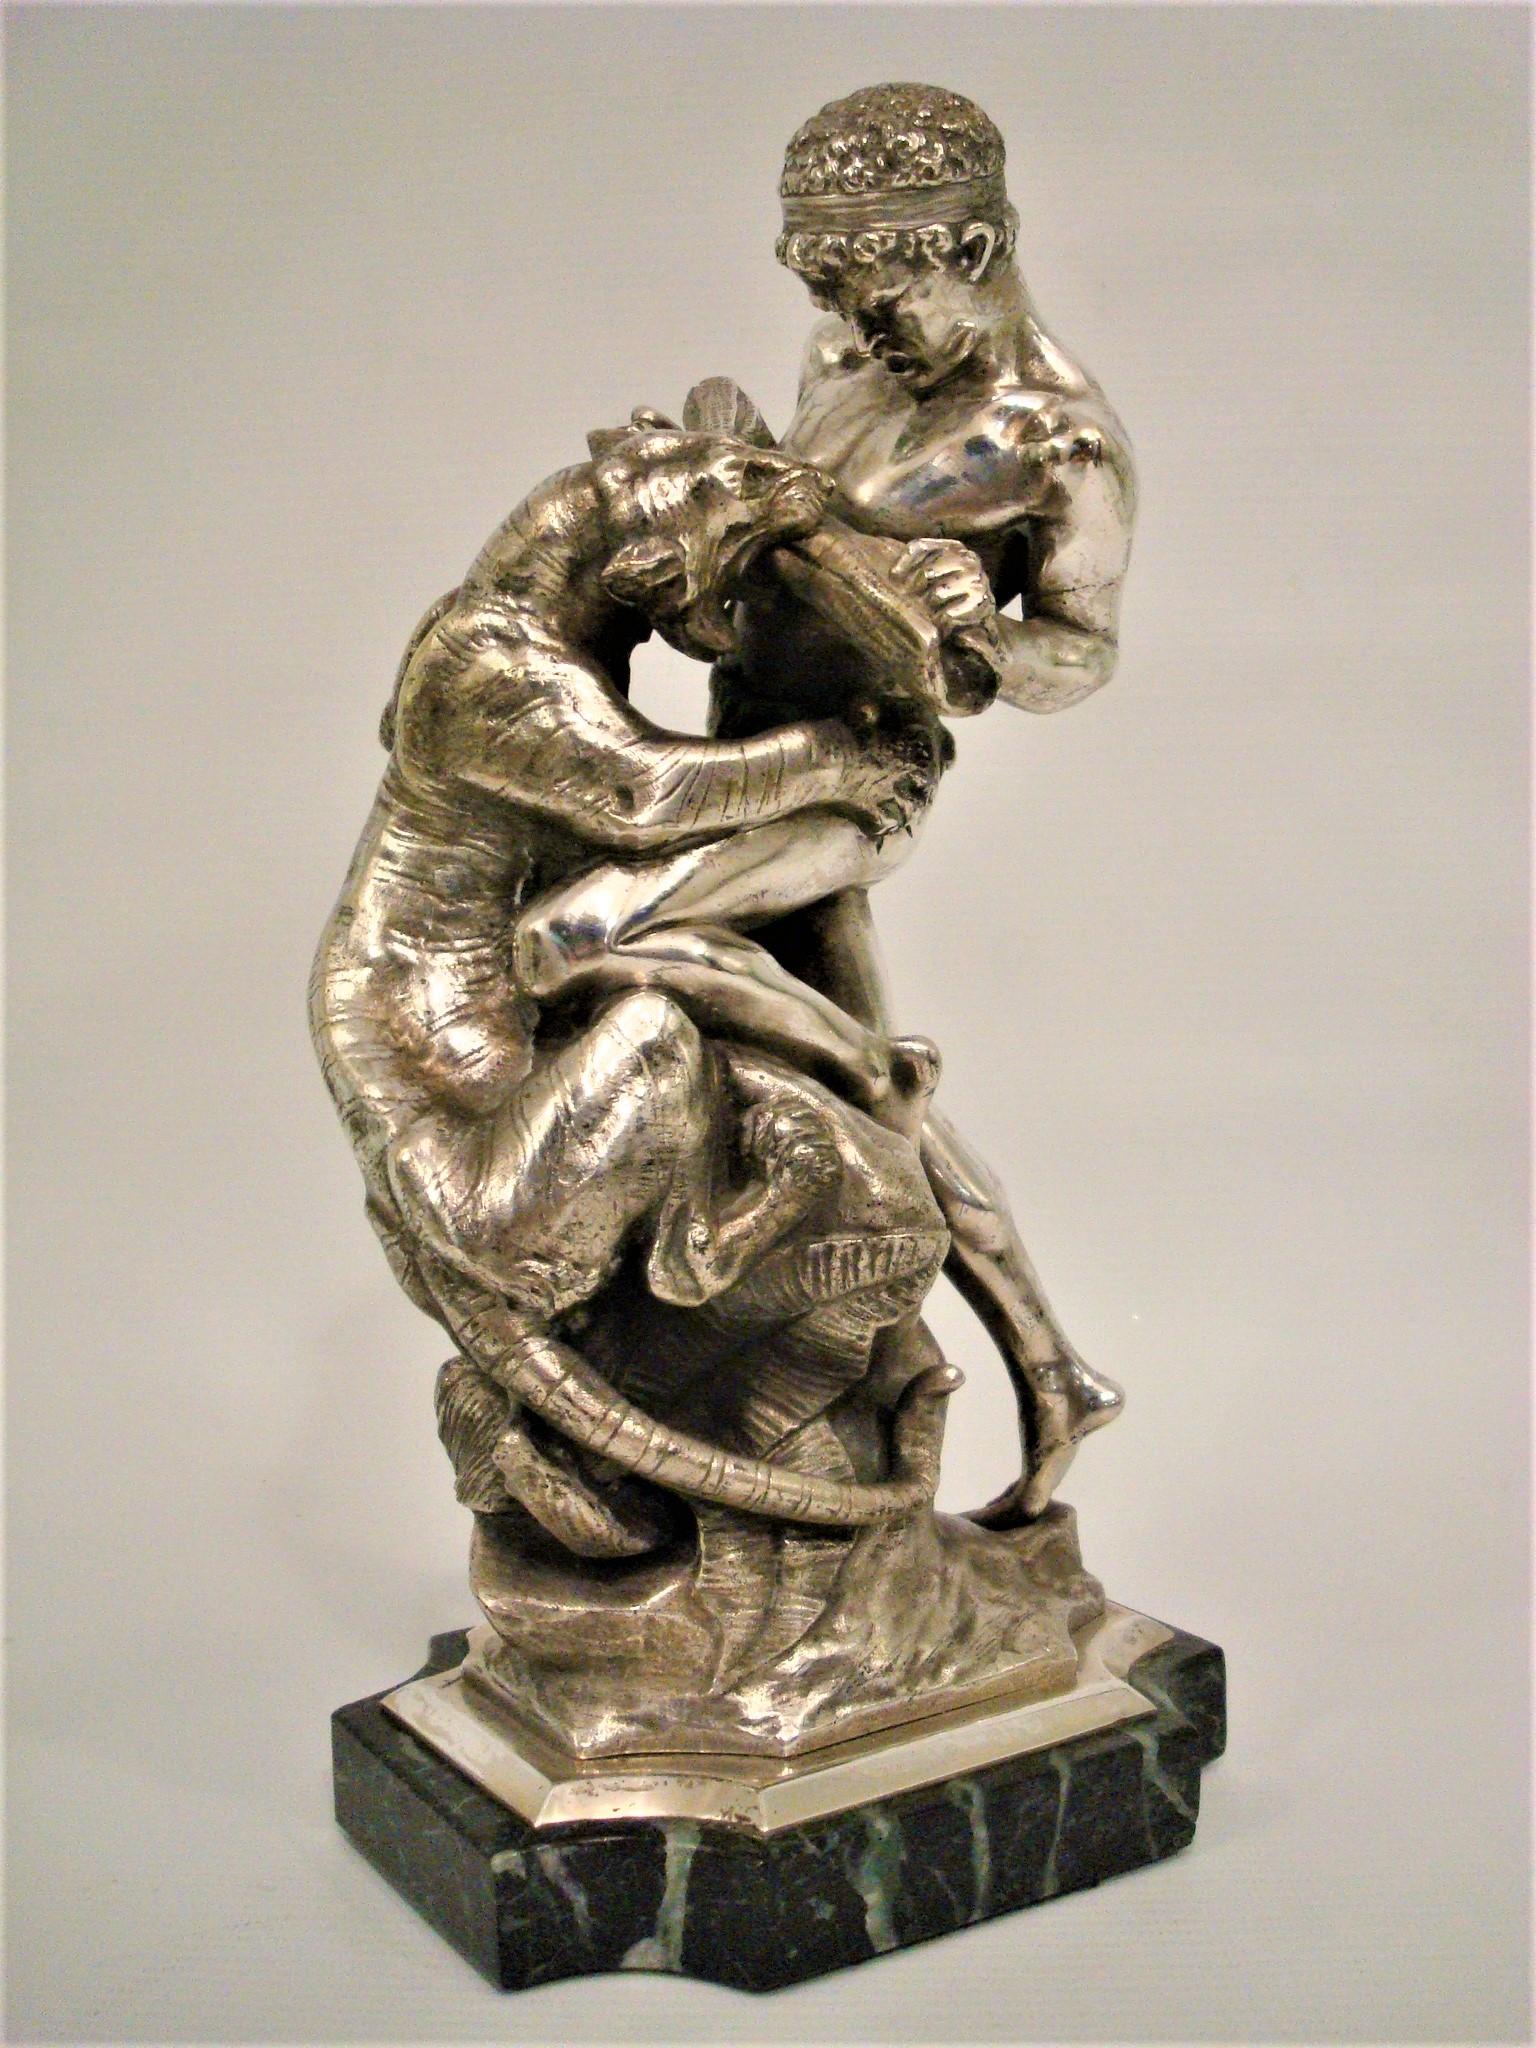 Edouard Drouot (1859-1945), The struggle for life (La Lutte pour la Vie), Silvered Bronze and Green marble sculpture
Signed 